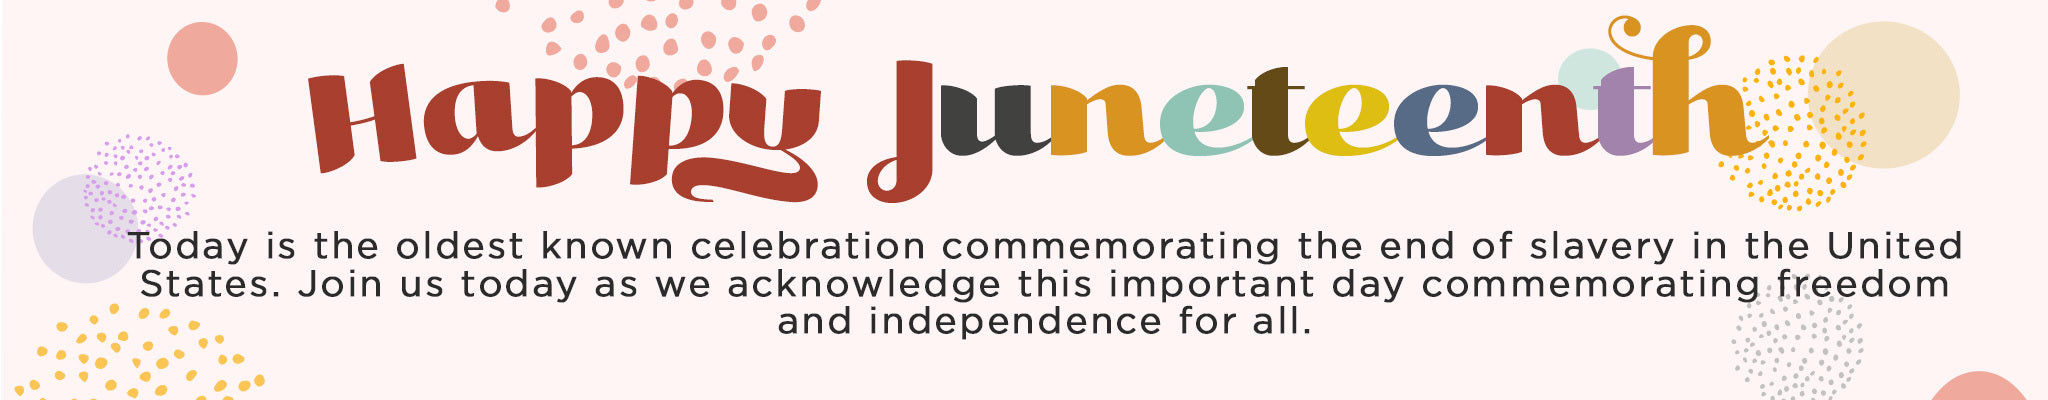 Happy Juneteenth | Today is the oldest known celebration commemorating the end of slavery in the United States. Join us today as we acknowledge this important day commemorating freedom and independence for all.